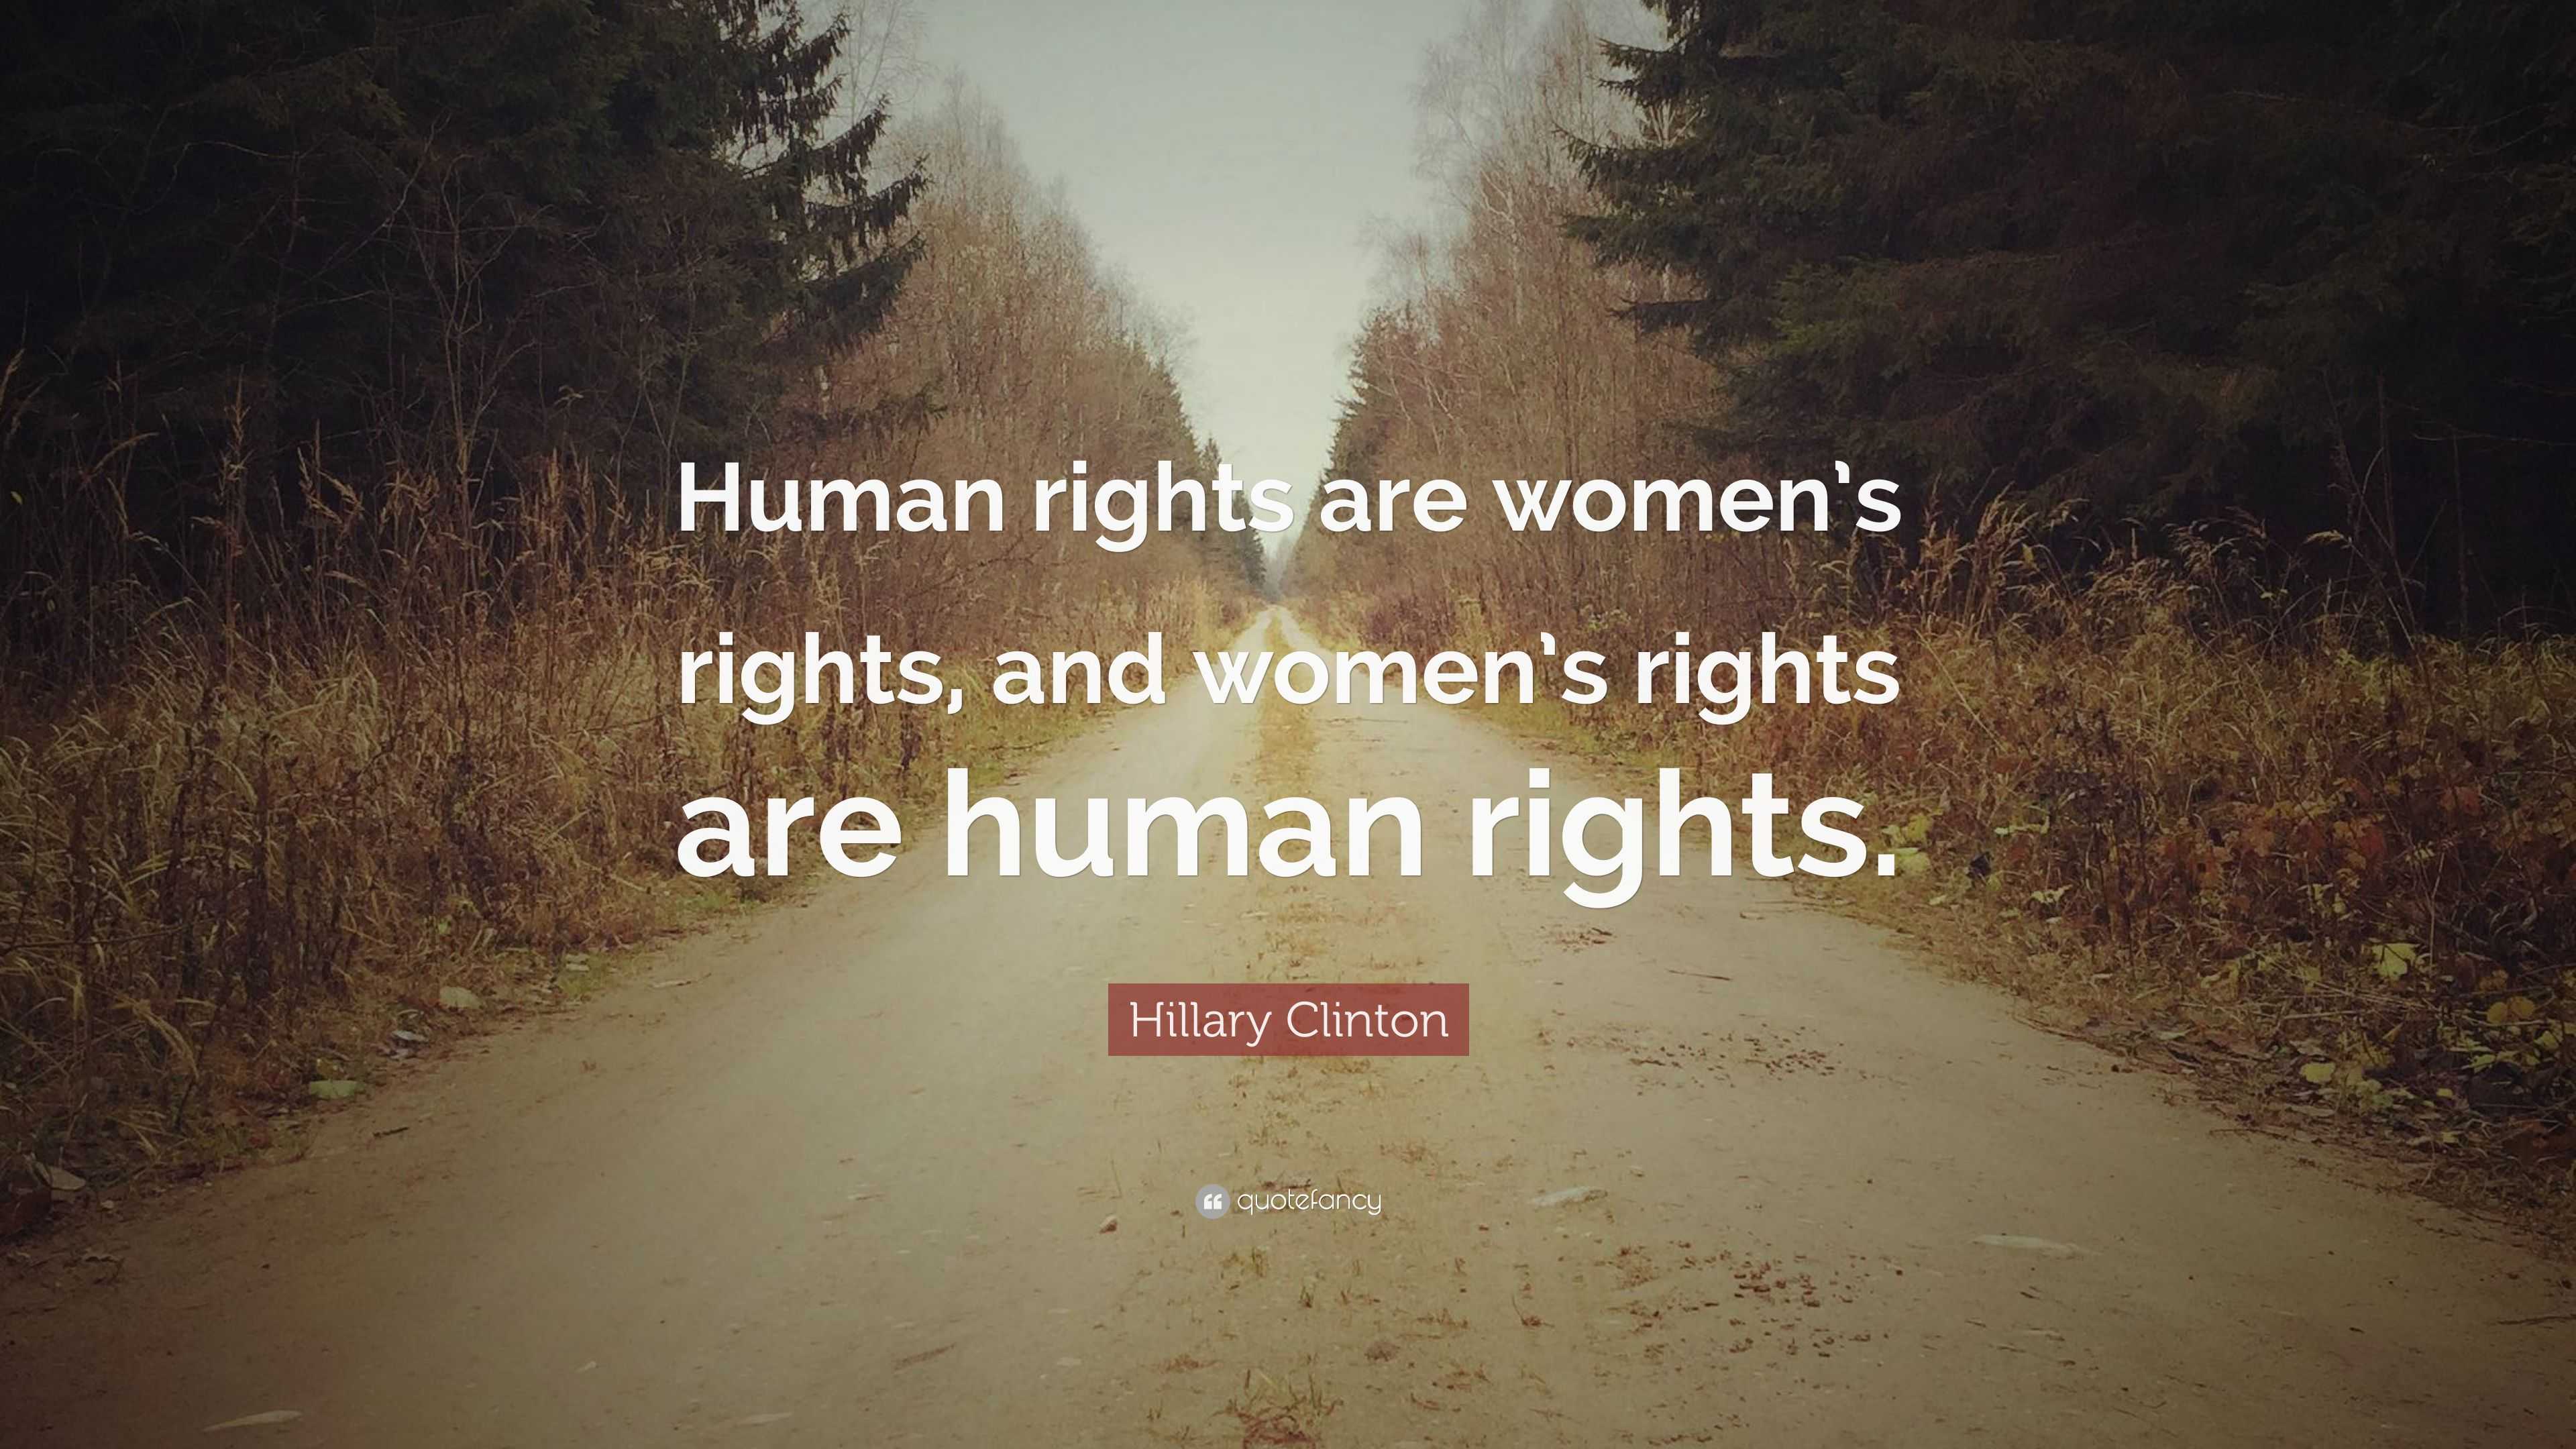 Hillary Clinton Quote: “Human rights are women’s rights, and women’s